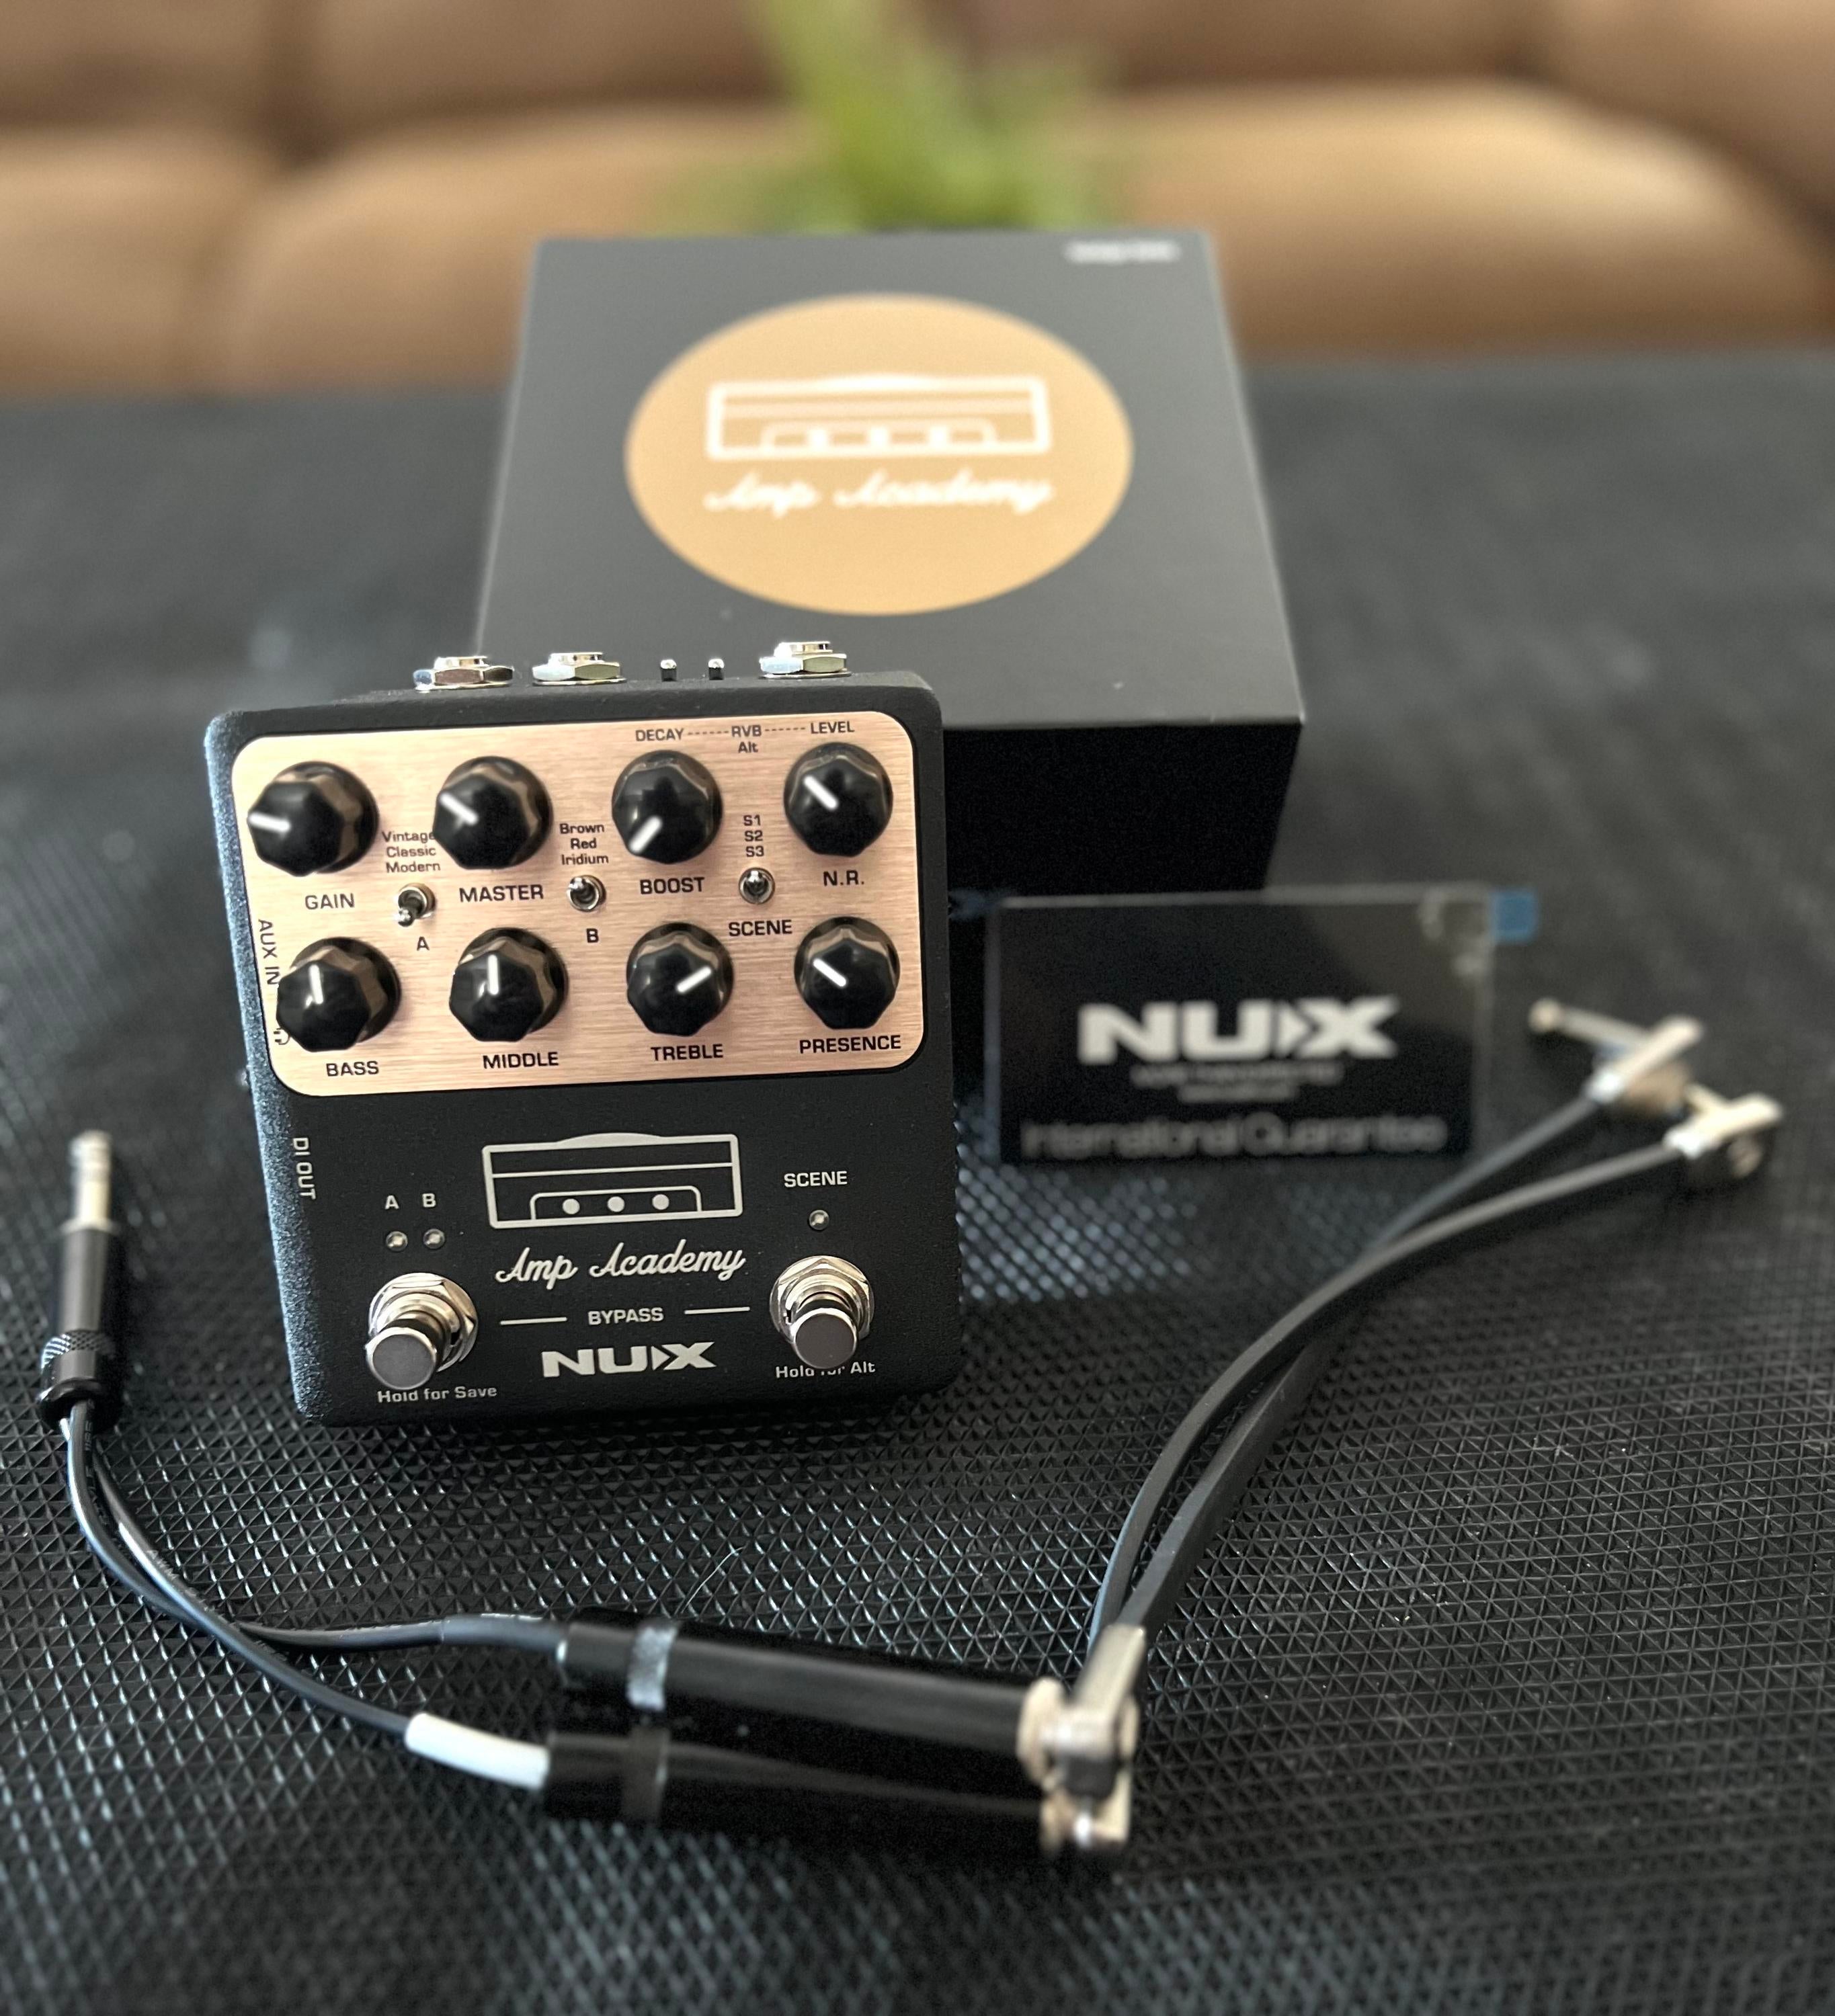 Used NUX NGS-6 amp academy pedal